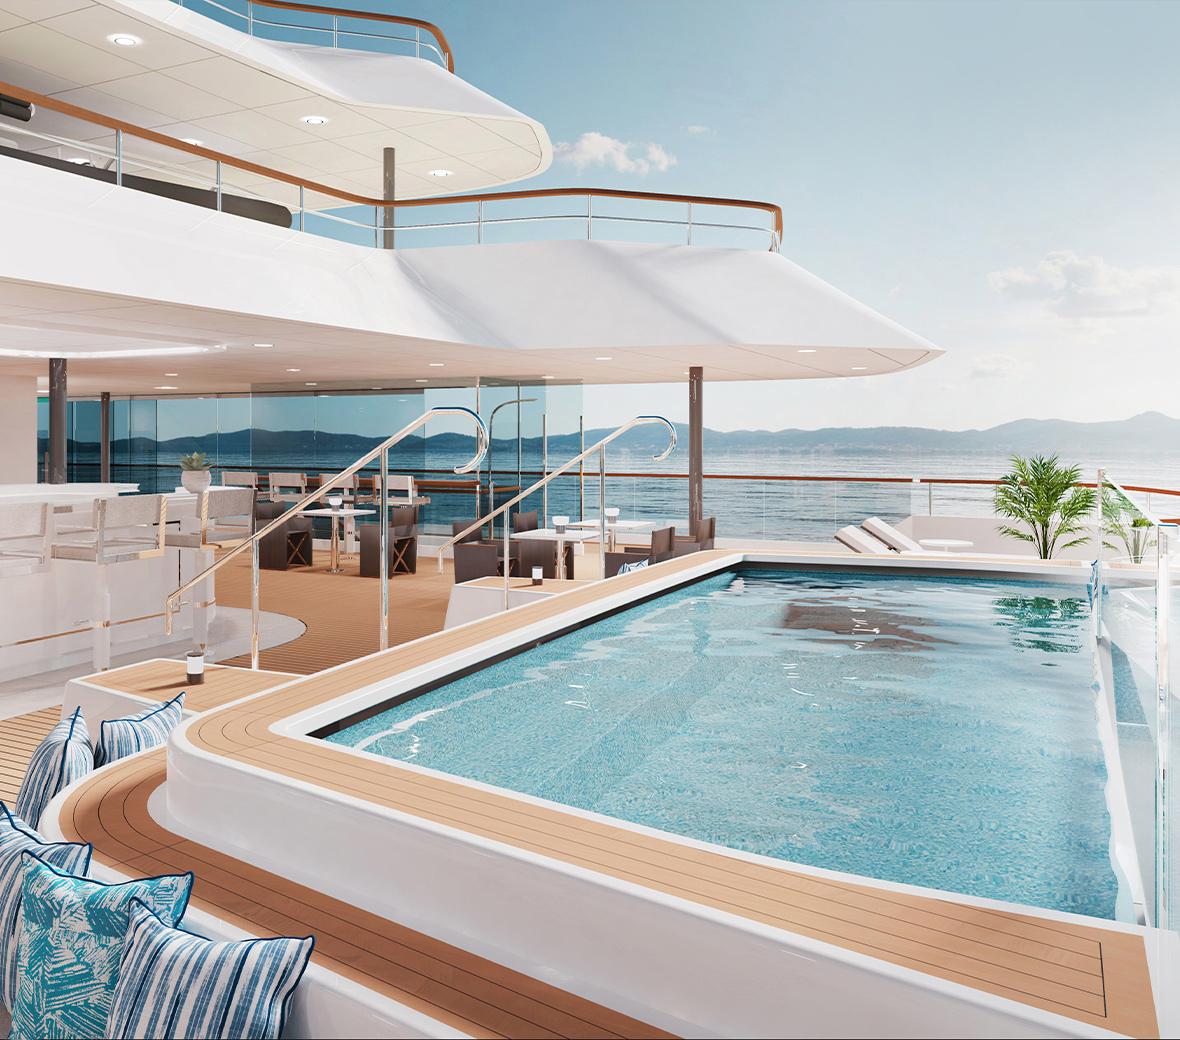 A pool on a yacht, that overlooks the ocean.